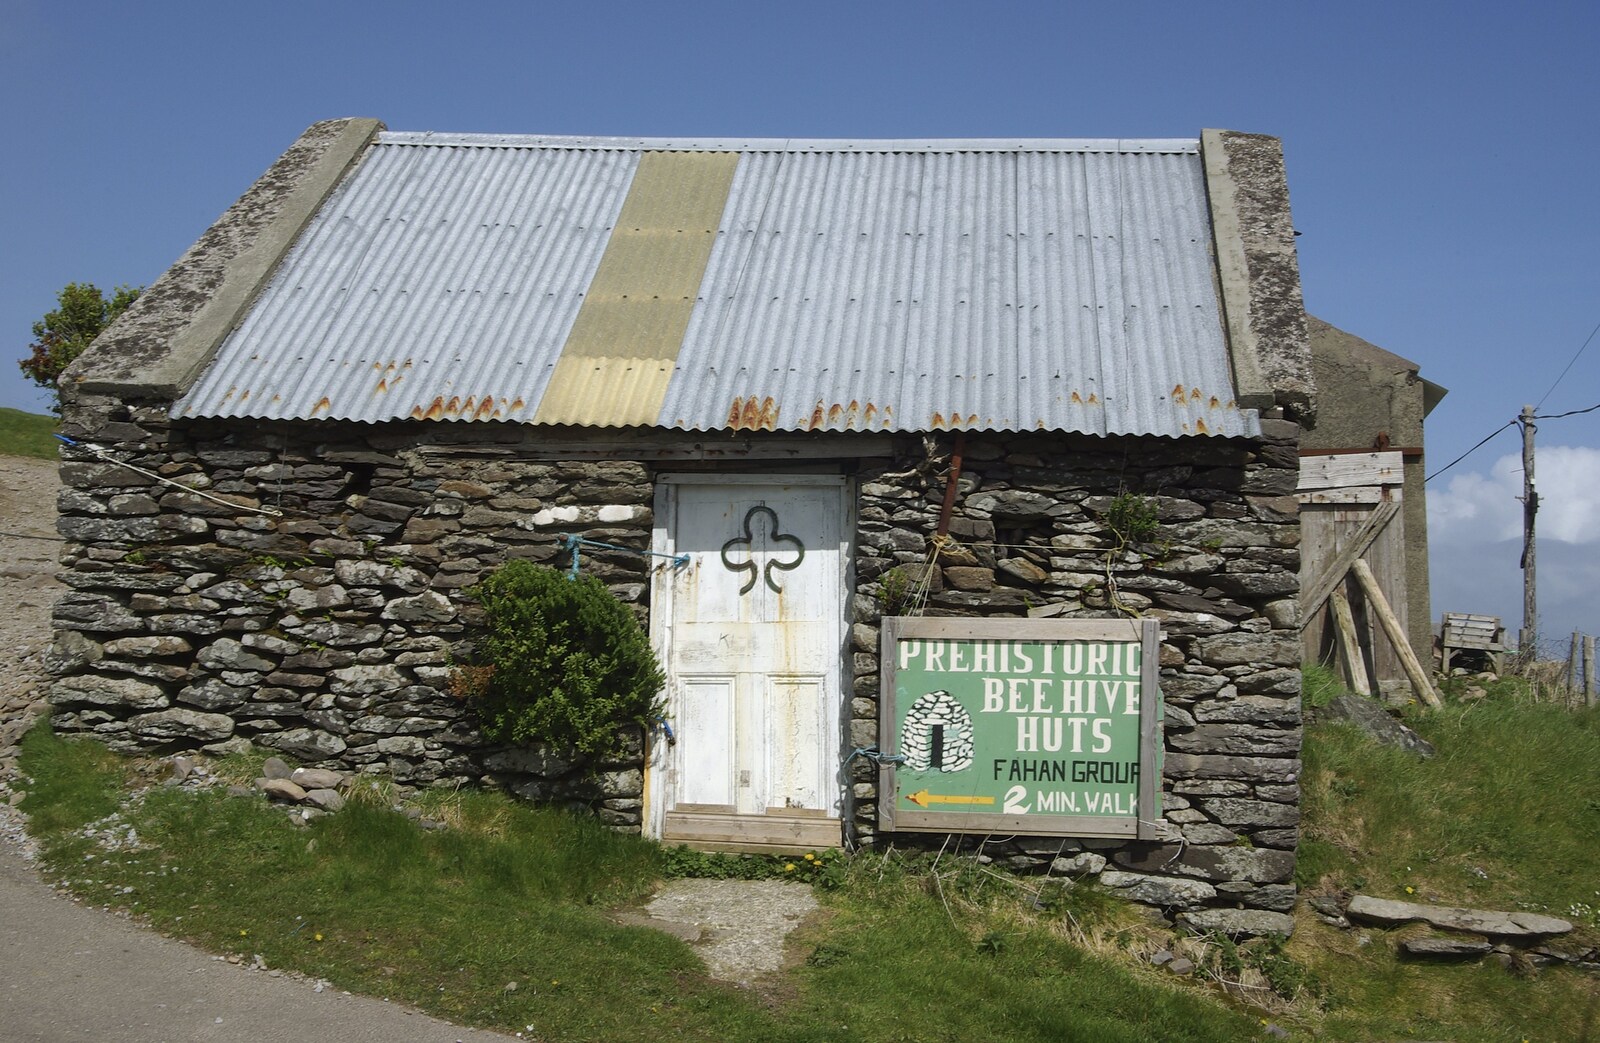 Connor Pass, Slea Head and Dingle, County Kerry, Ireland - 4th May 2008: A tin-roofed shed near the Fahan Clochán